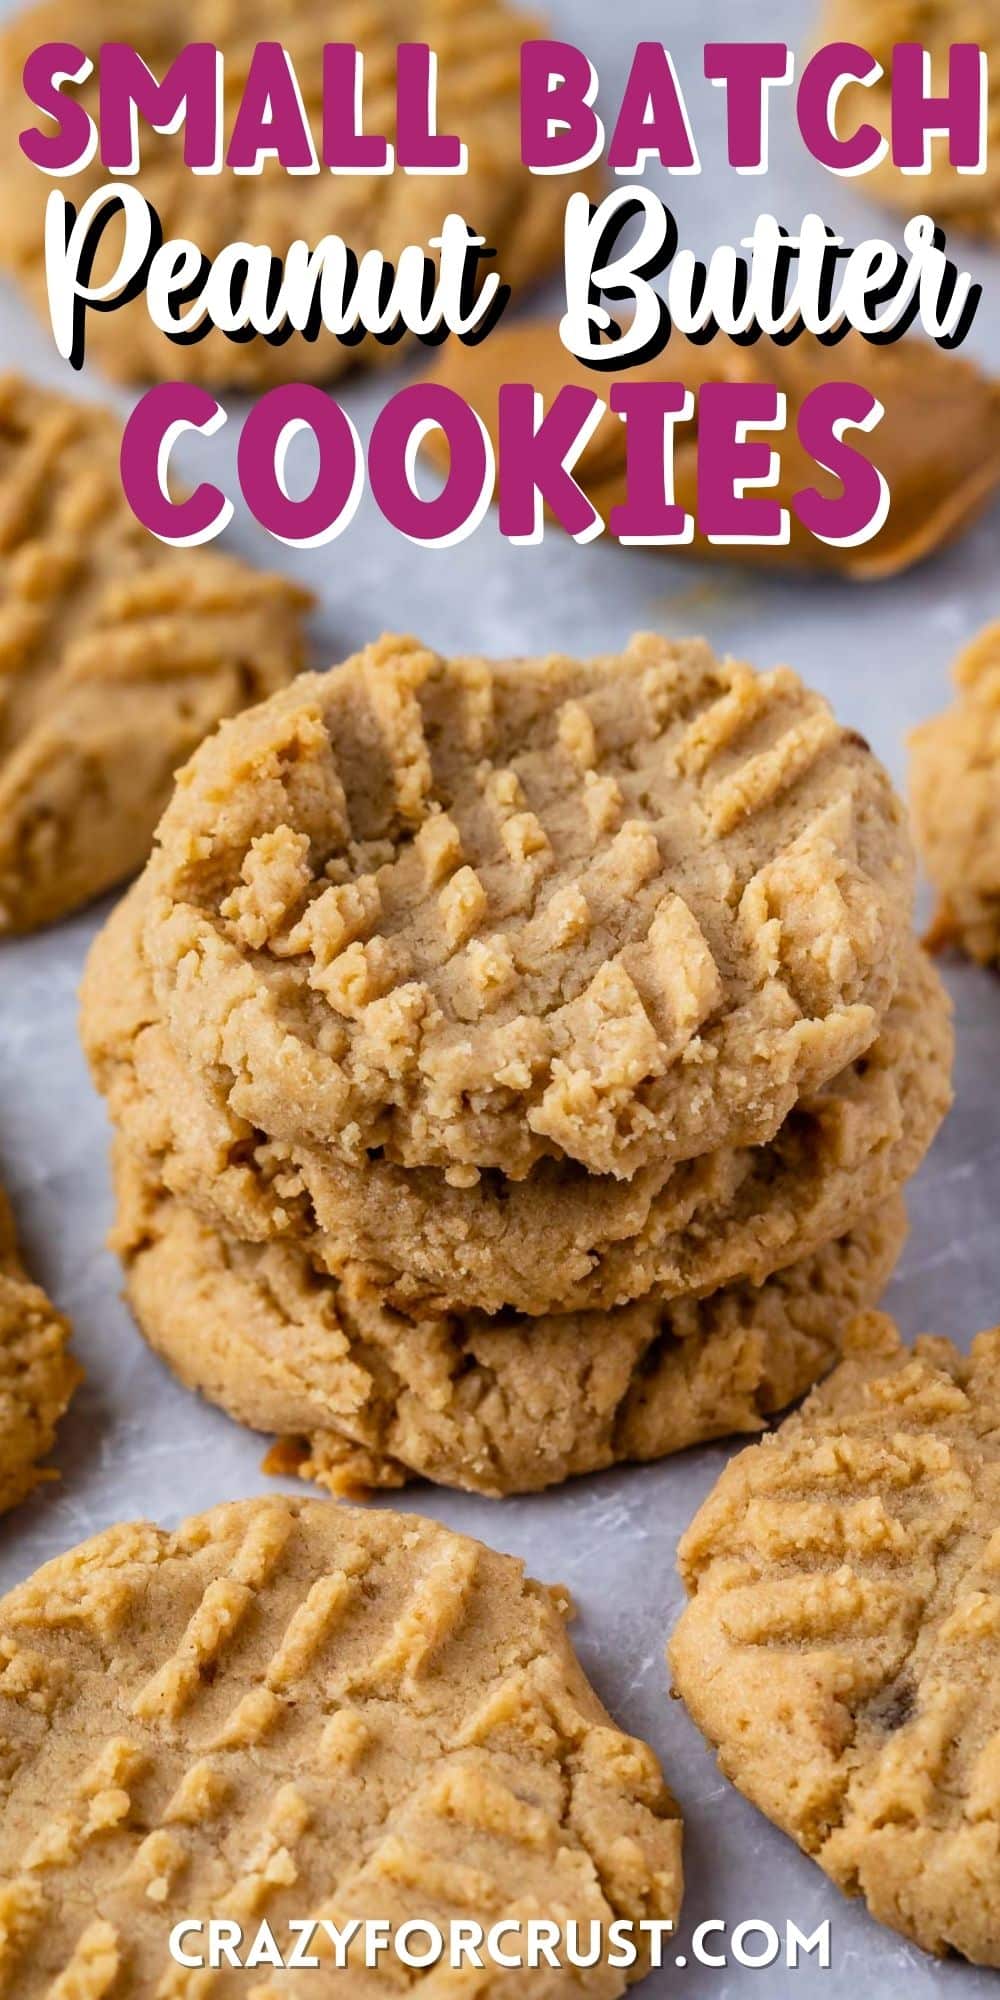 stacked peanut butter cookies with words on the image